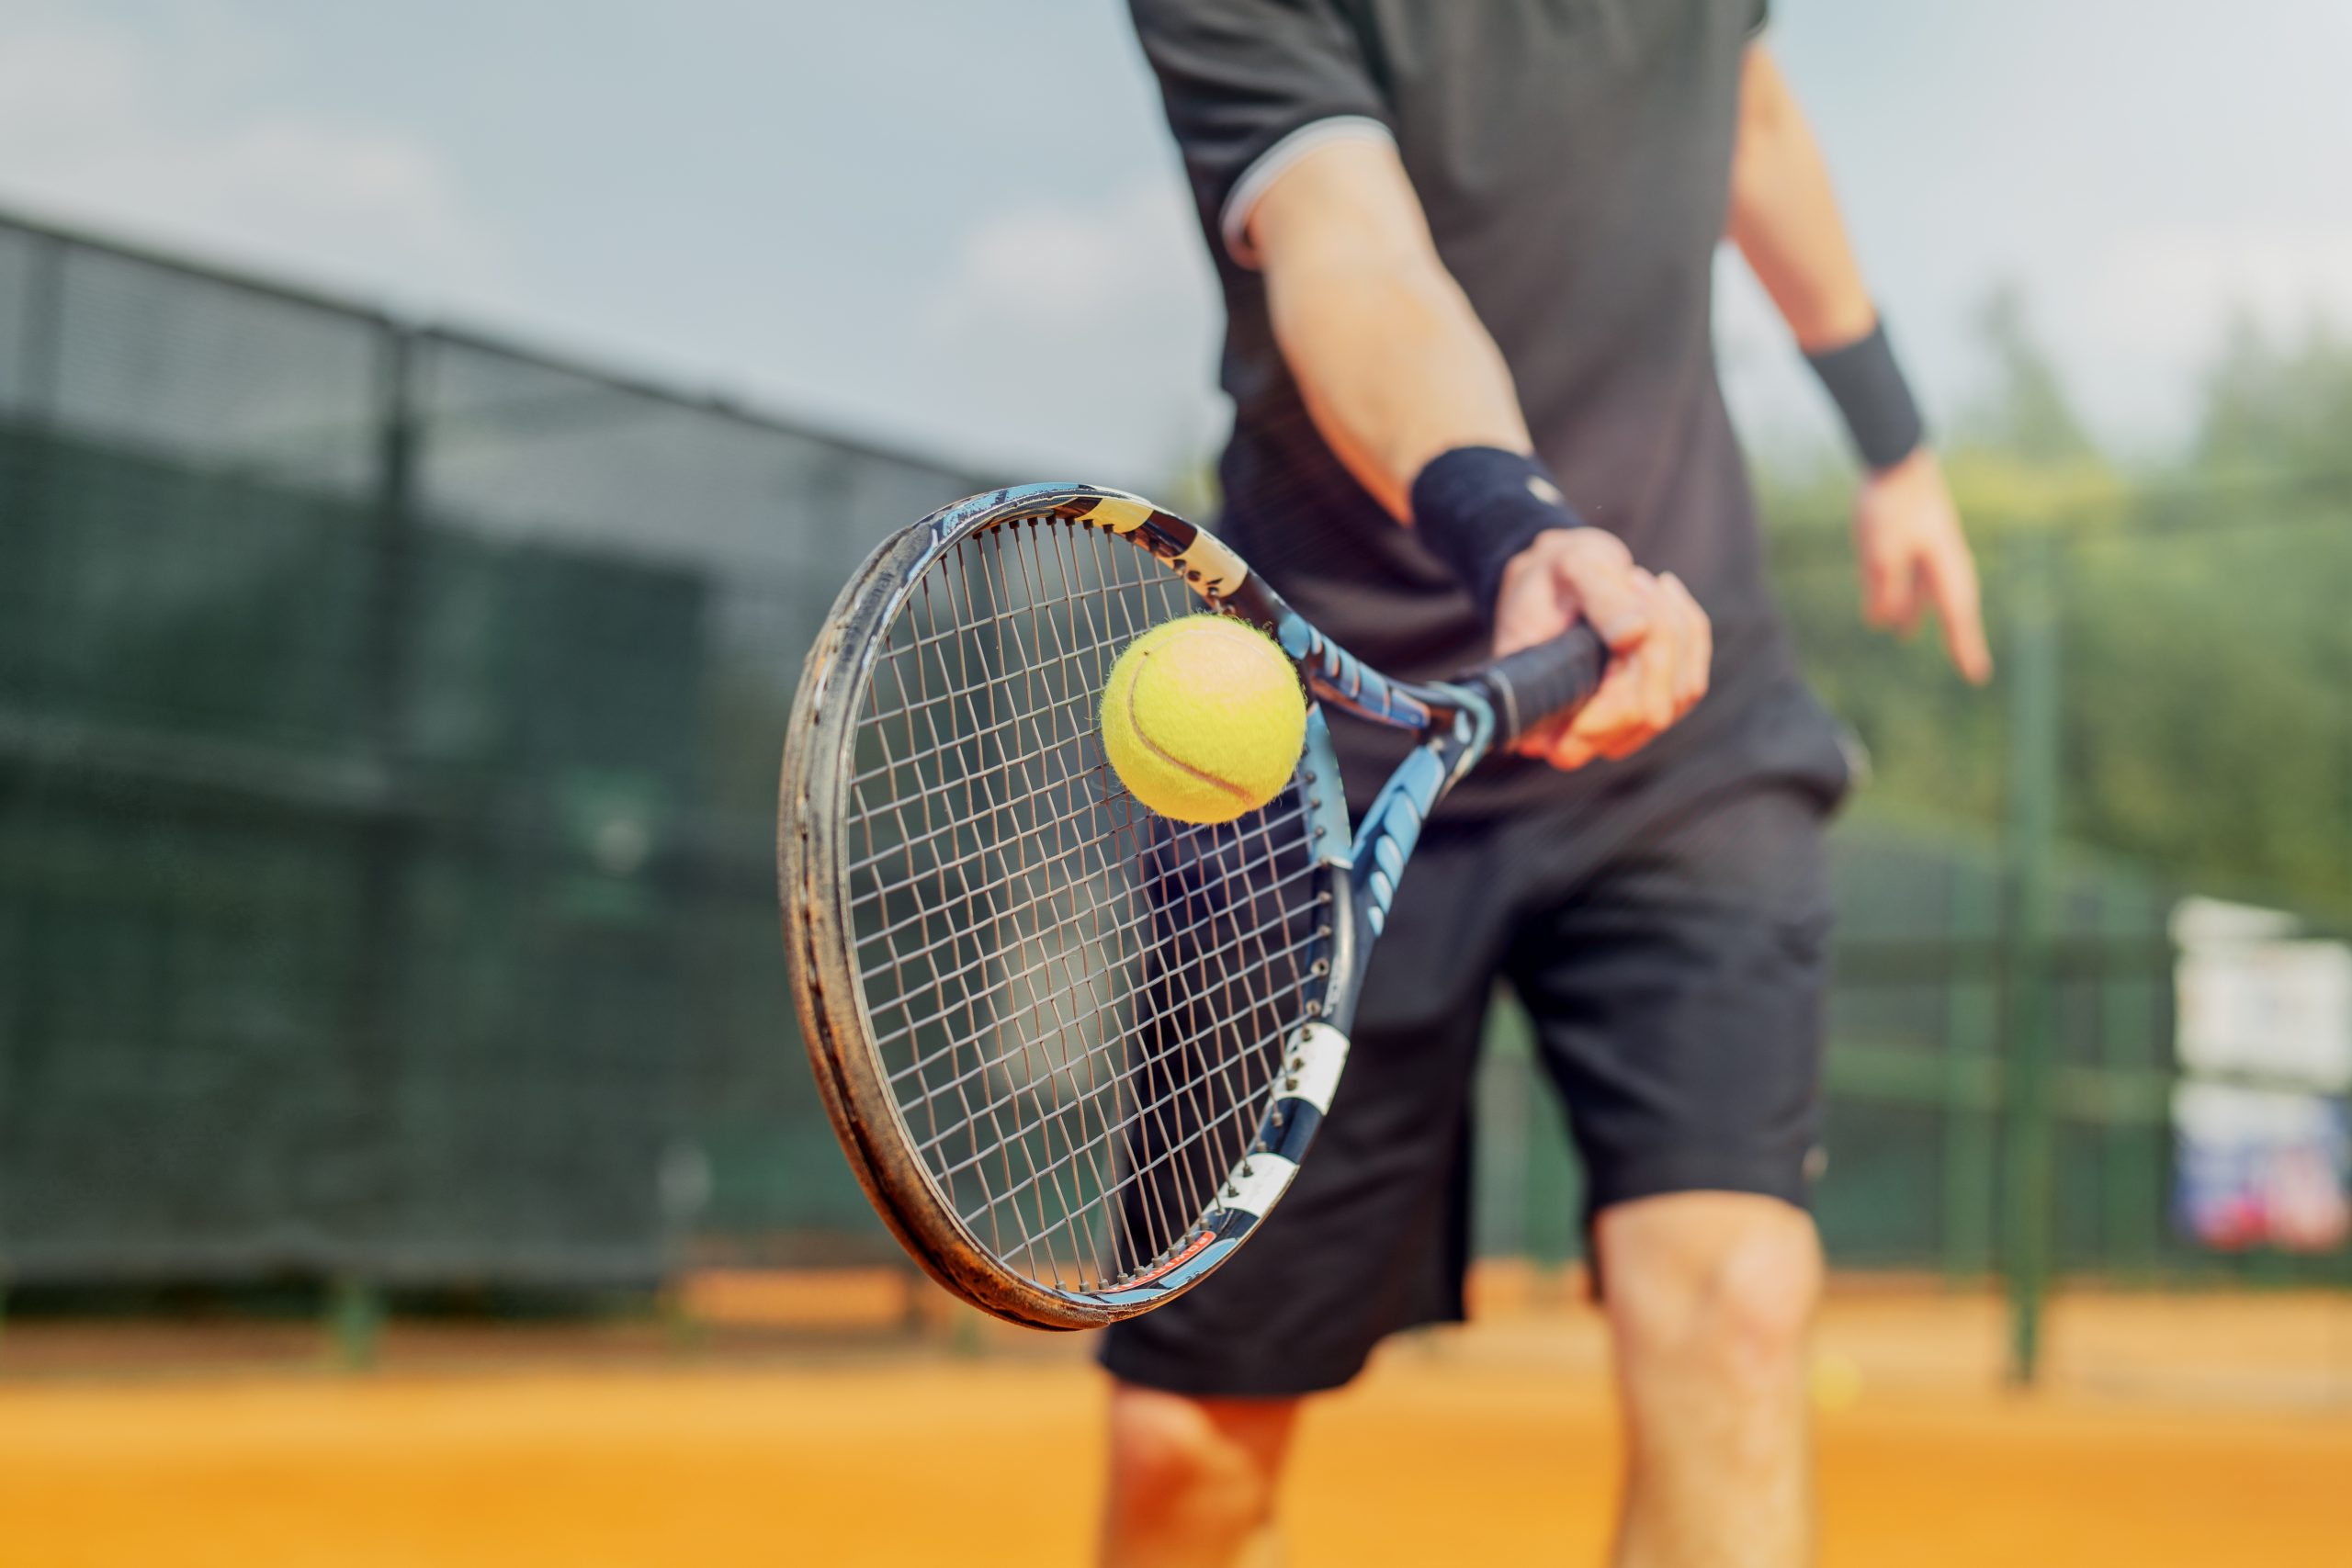 Physical therapy should not make tennis elbow worse